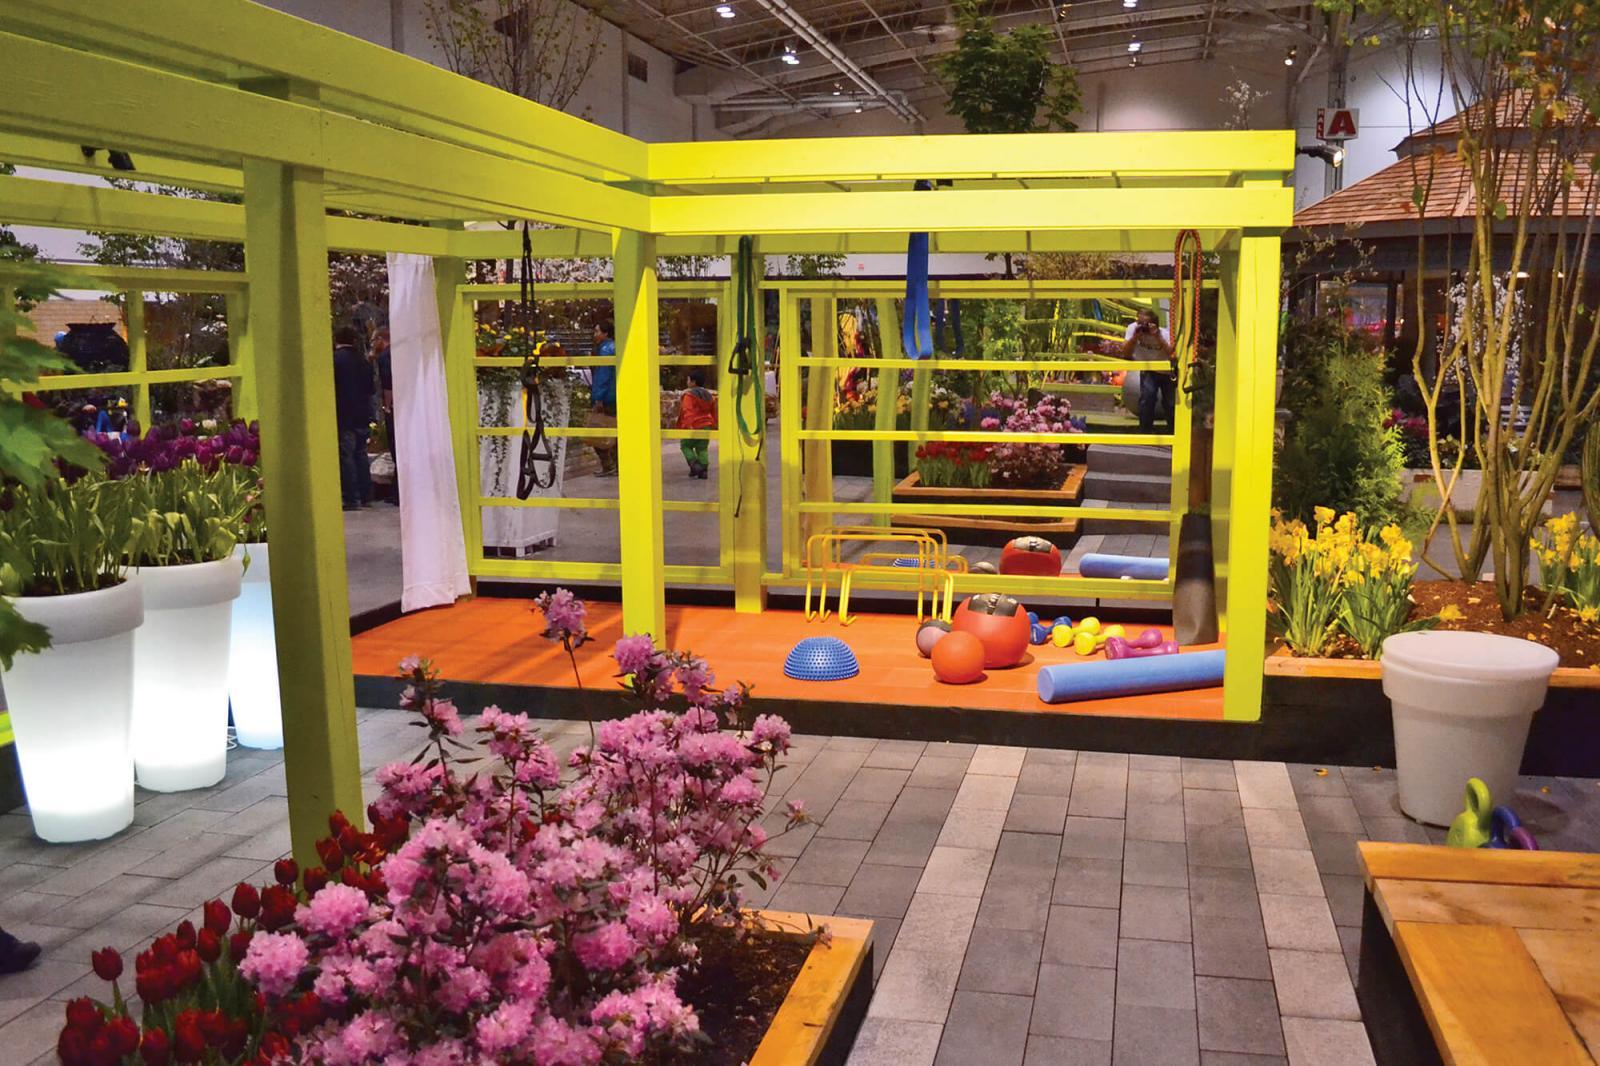 While it is ideal to have a property with various levels and open spaces, an Otium Exercise Garden can fit in any small urban environment. This is Shawn Gallaugher’s garden at Canada Blooms in 2012.